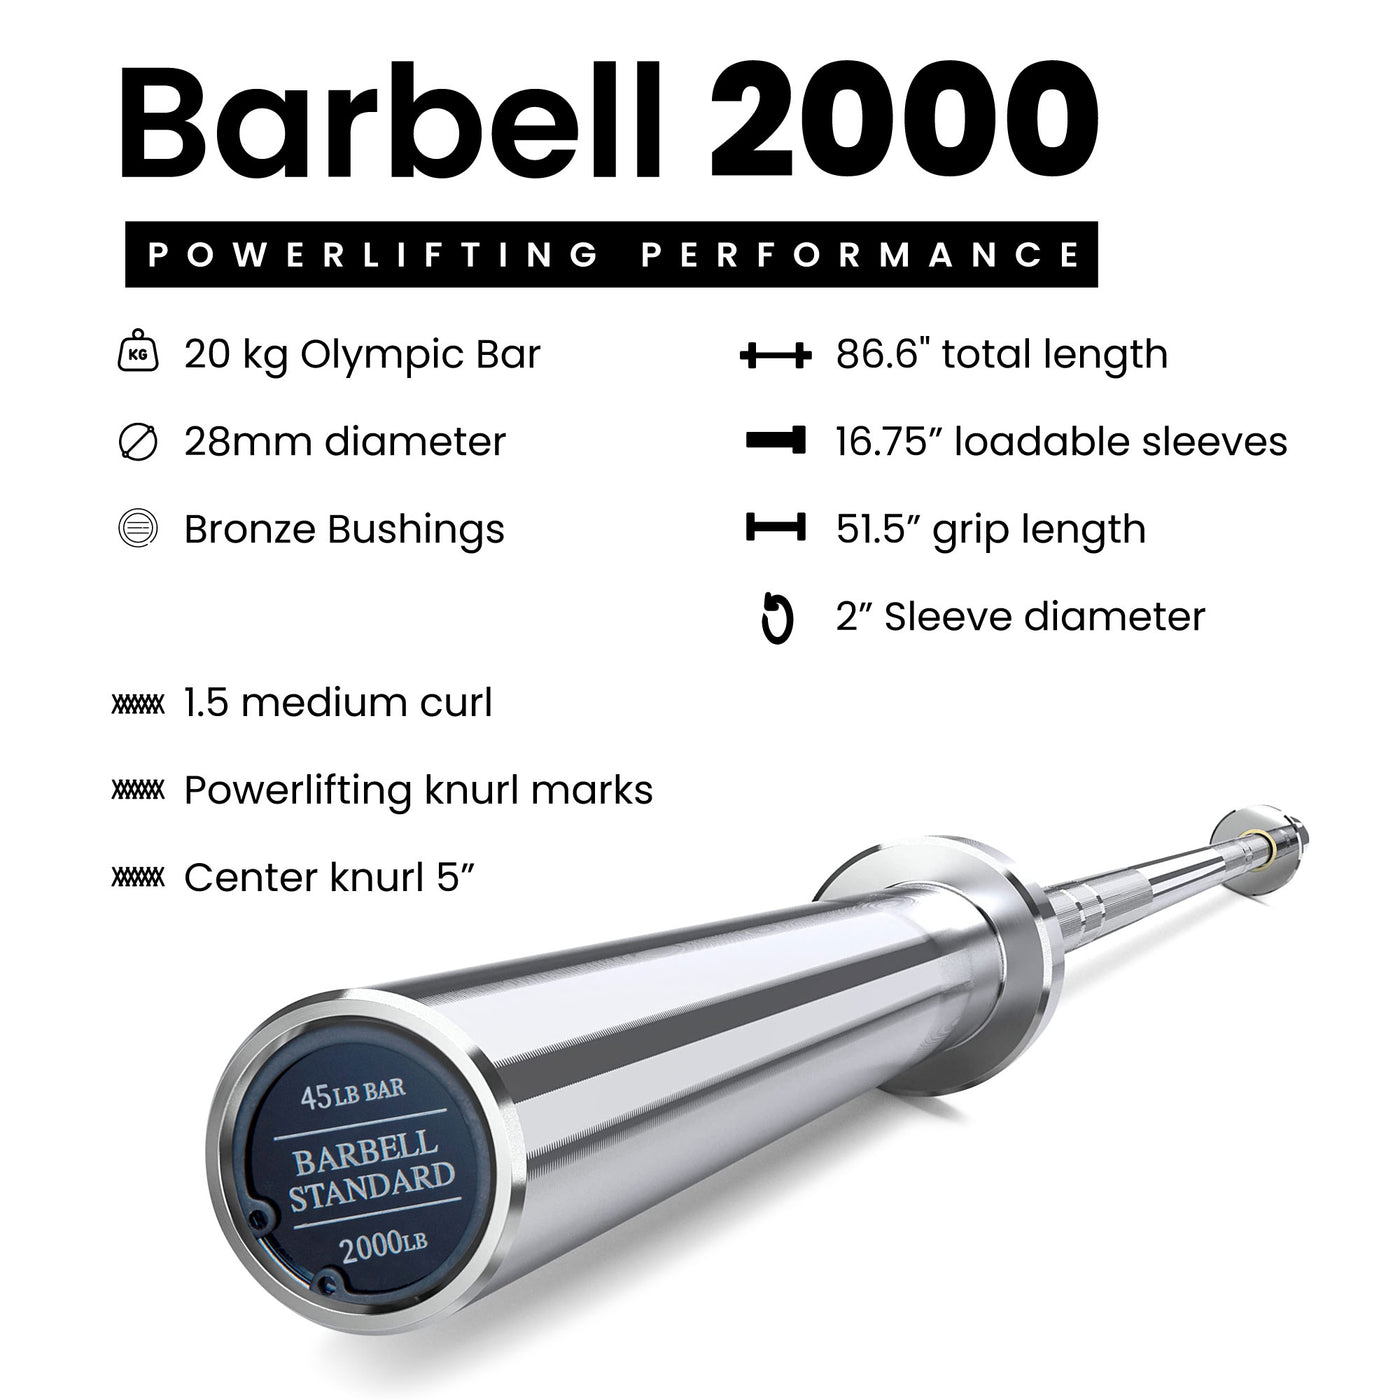 Barbell 2000 Sets